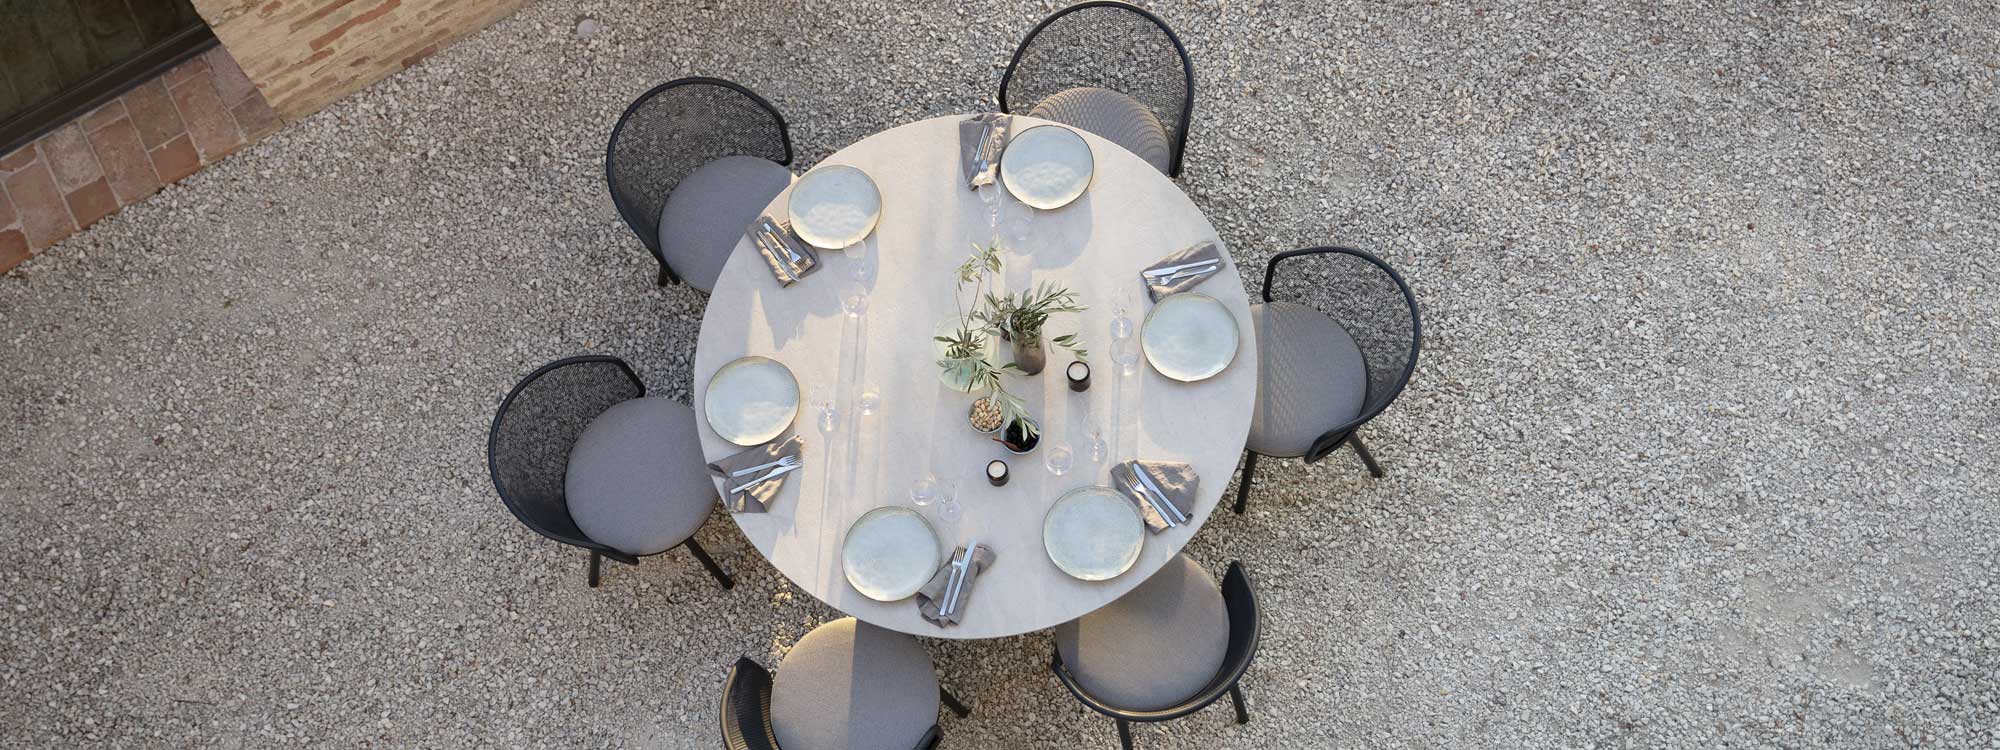 Image of birdseye view of Branta circular outdoor table and Baza garden chairs in gravel courtyard